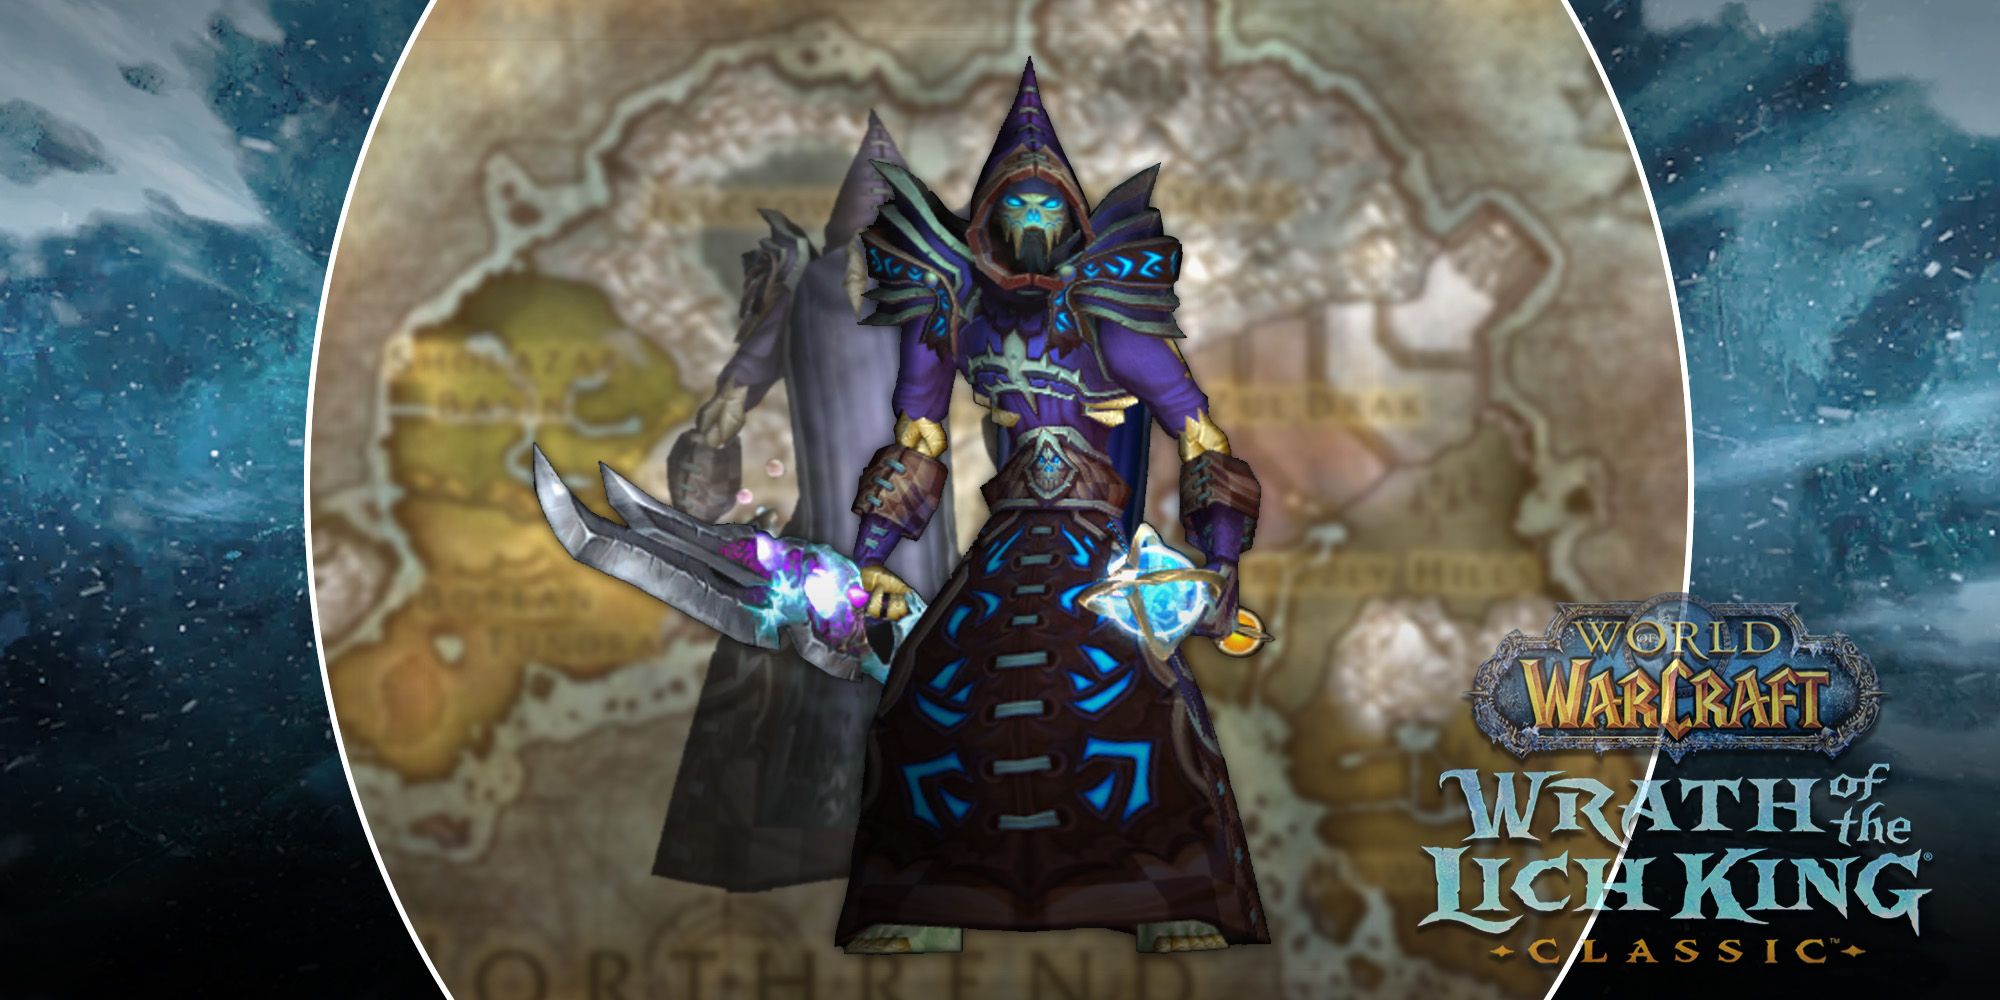 in game model of the best in slot gear for warlock pre bis raid in wow wotlk classic wrath